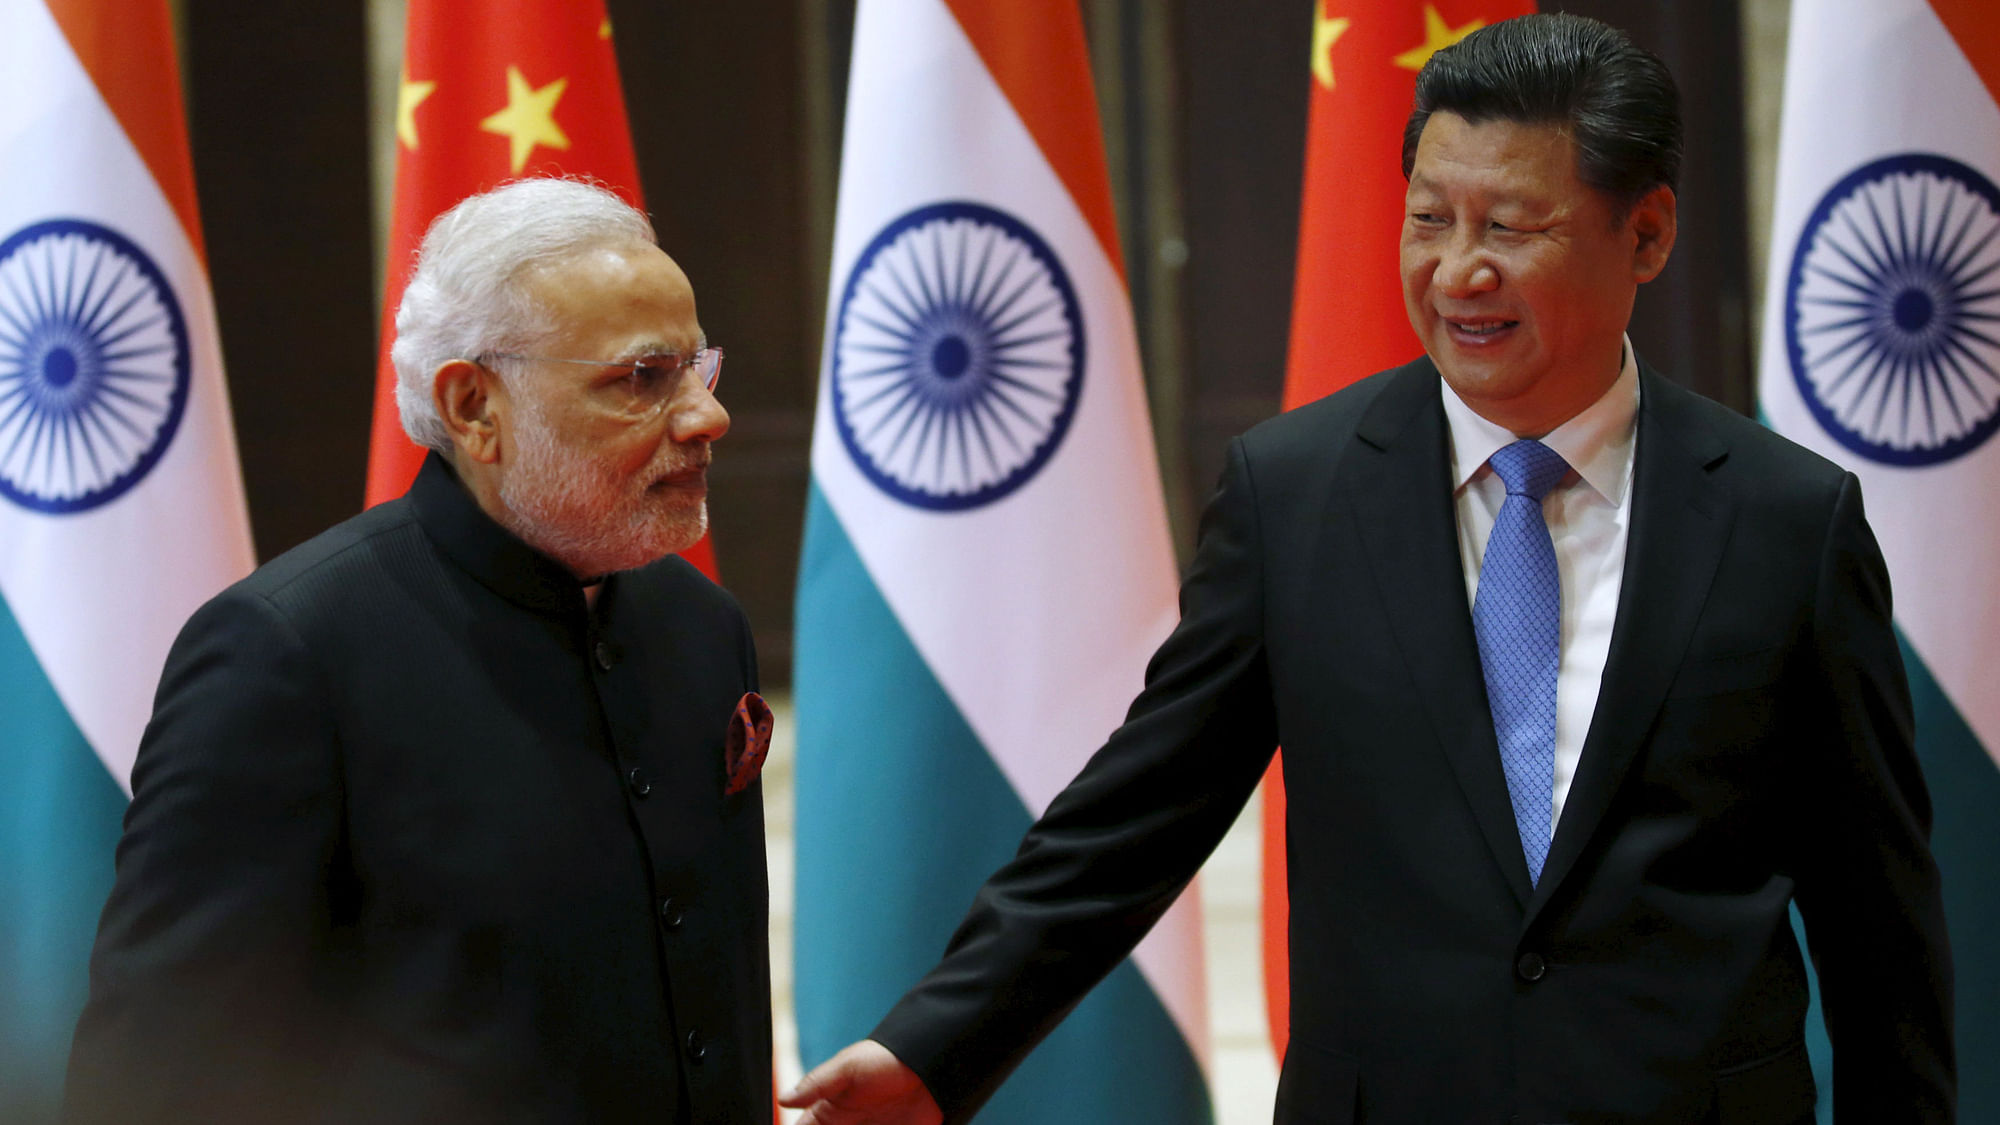 File photo: Chinese President Xi Jinping (R) guides Indian Prime Minister Narendra Modi to a meeting room in Xian, Shaanxi province, China.  (Photo: Reuters)